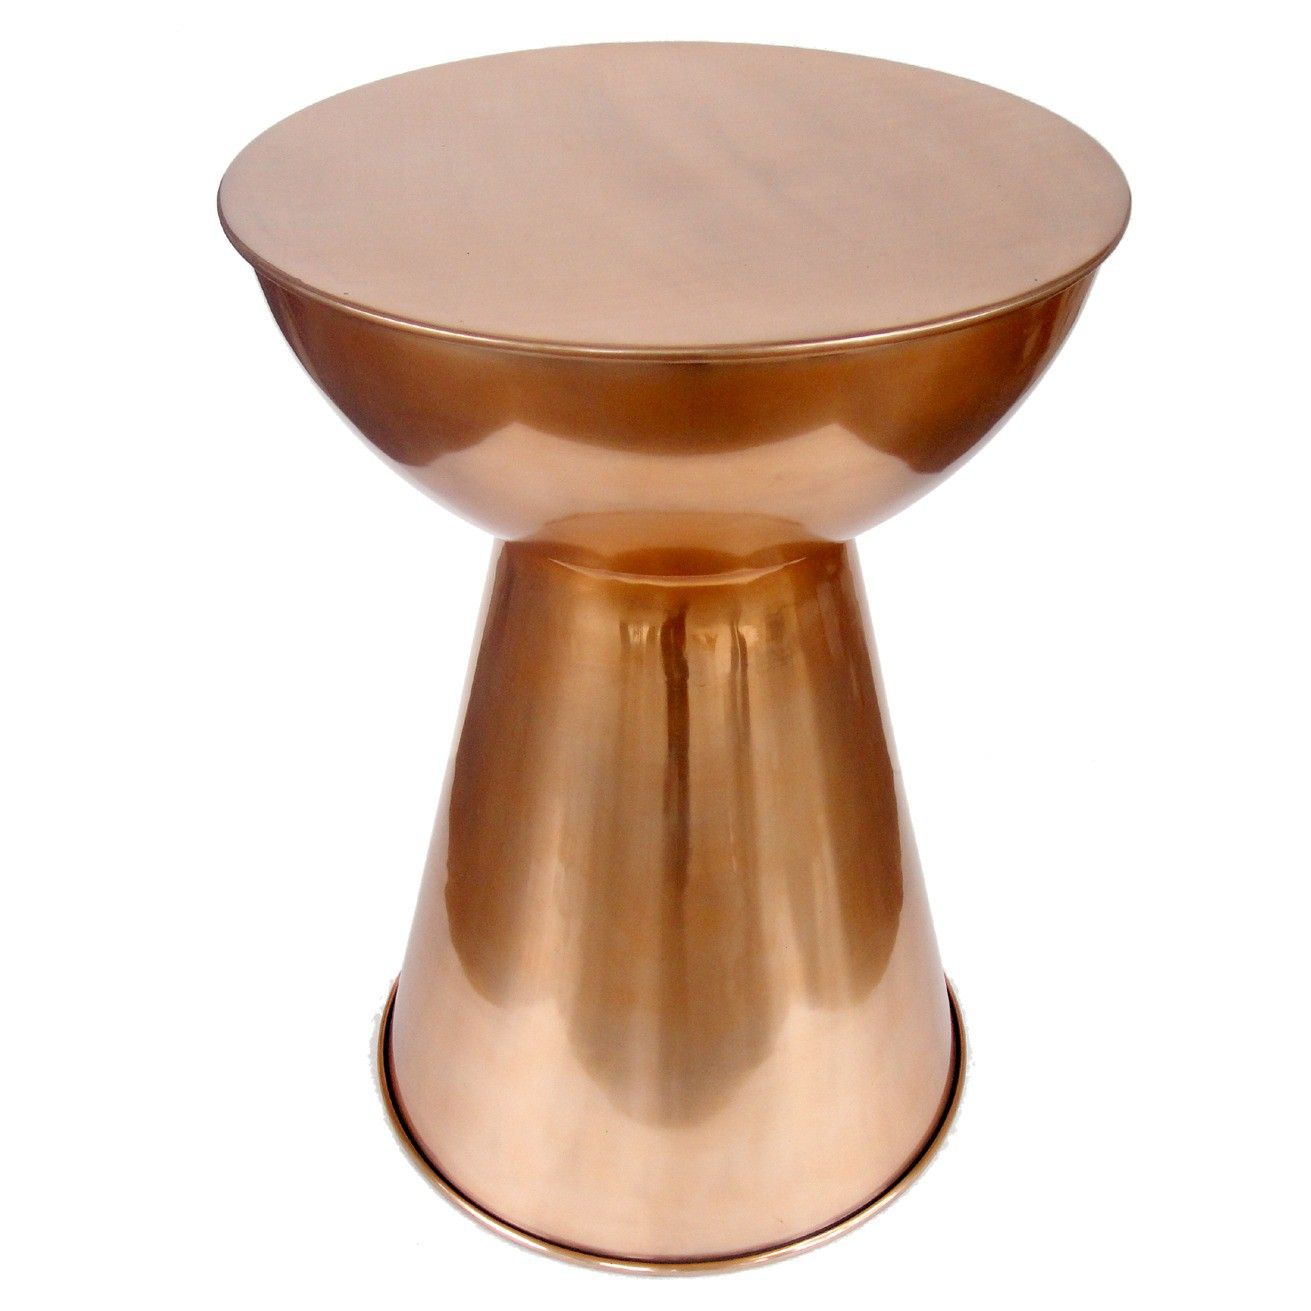 threshold hourglass accent table target project terrace pottery barn gold high carpet tile edging strip two nesting tables round side marble top modern furniture websites canvas